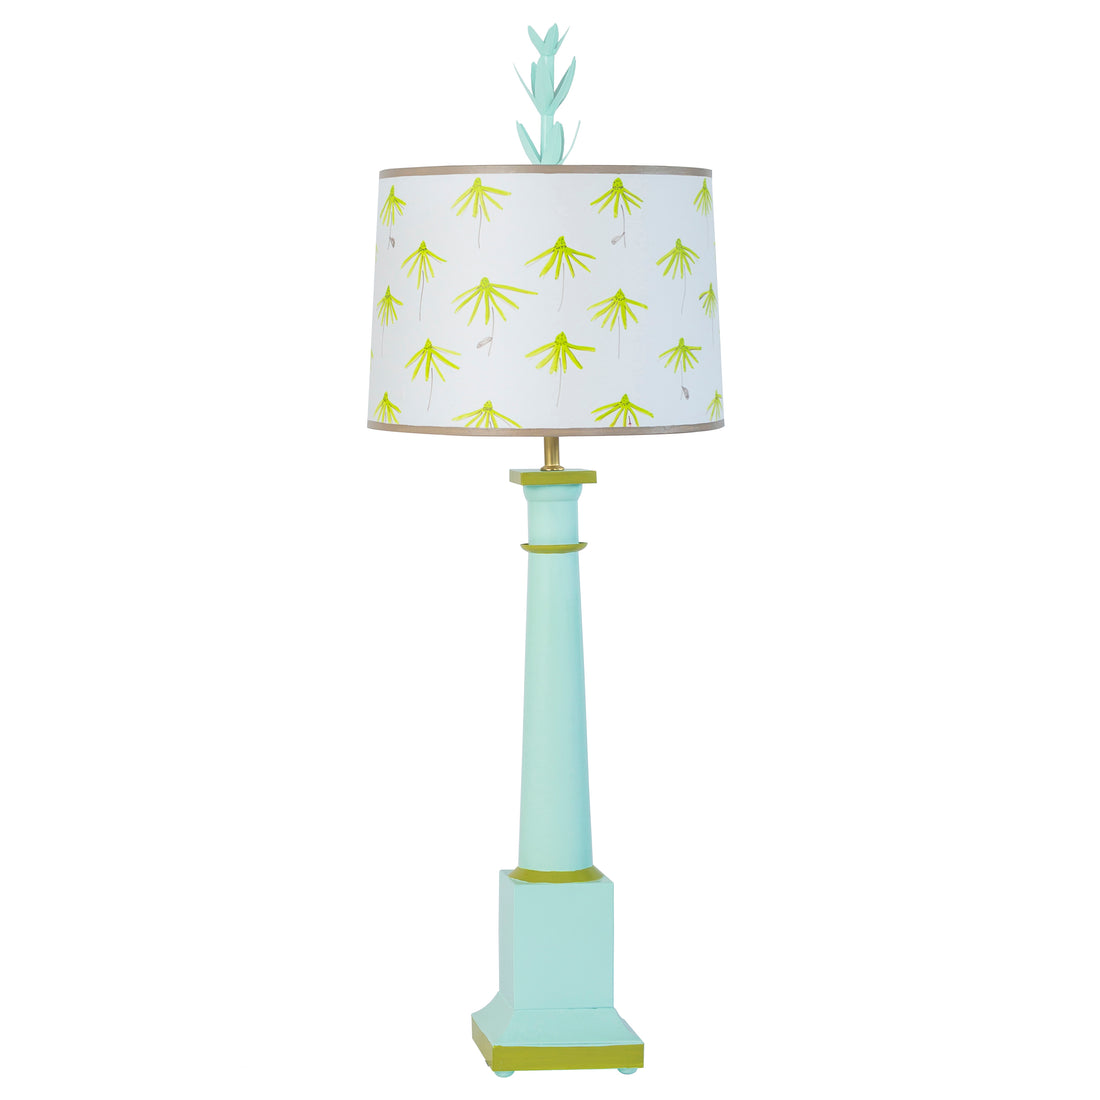 Erica tole table lamp , shade with hand painted cone flowers